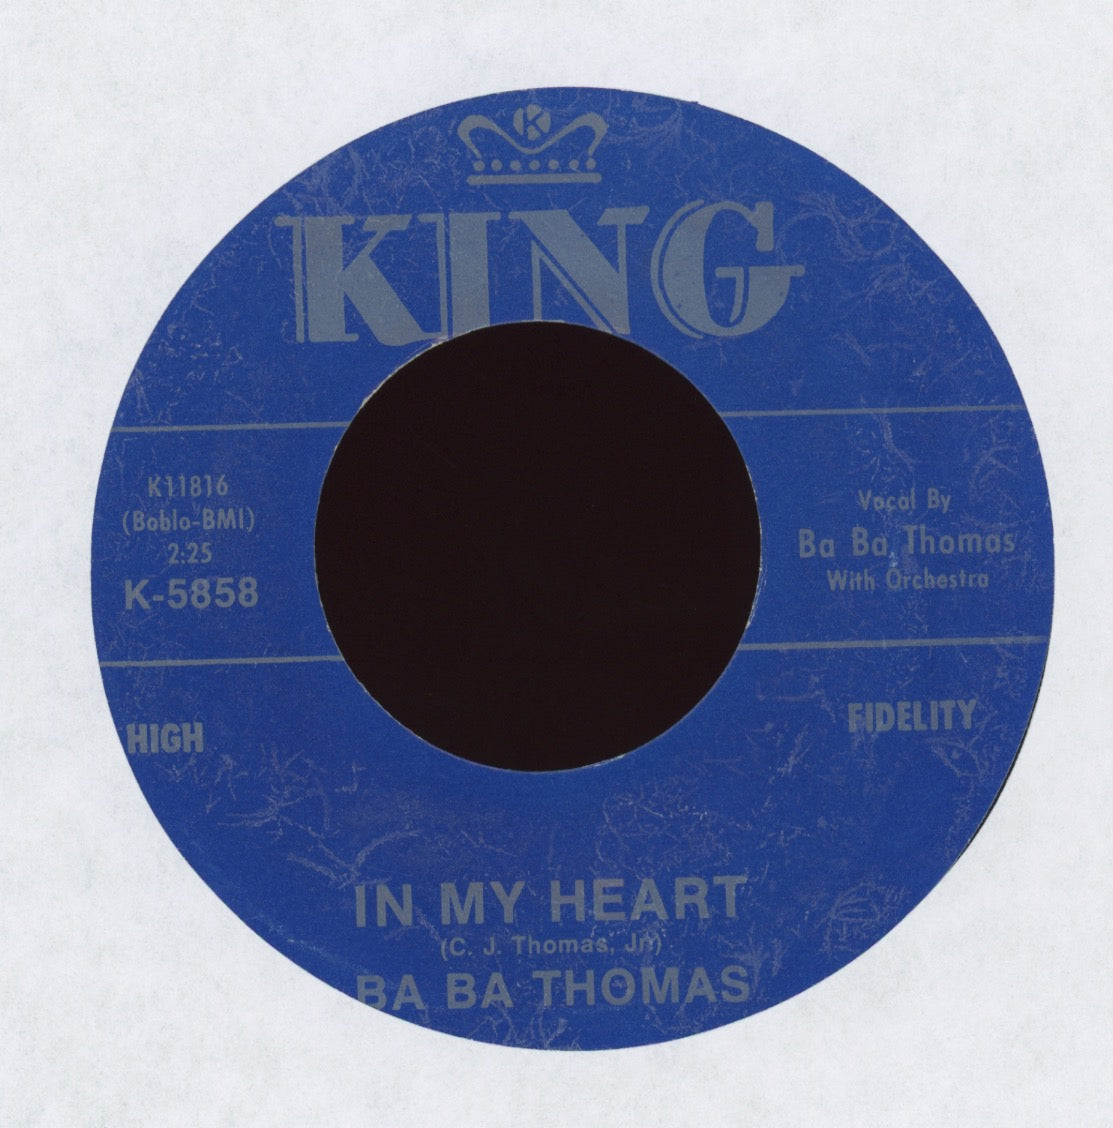 Ba Ba Thomas - (Why Don't You) Leave It Alone on King Second Pressing